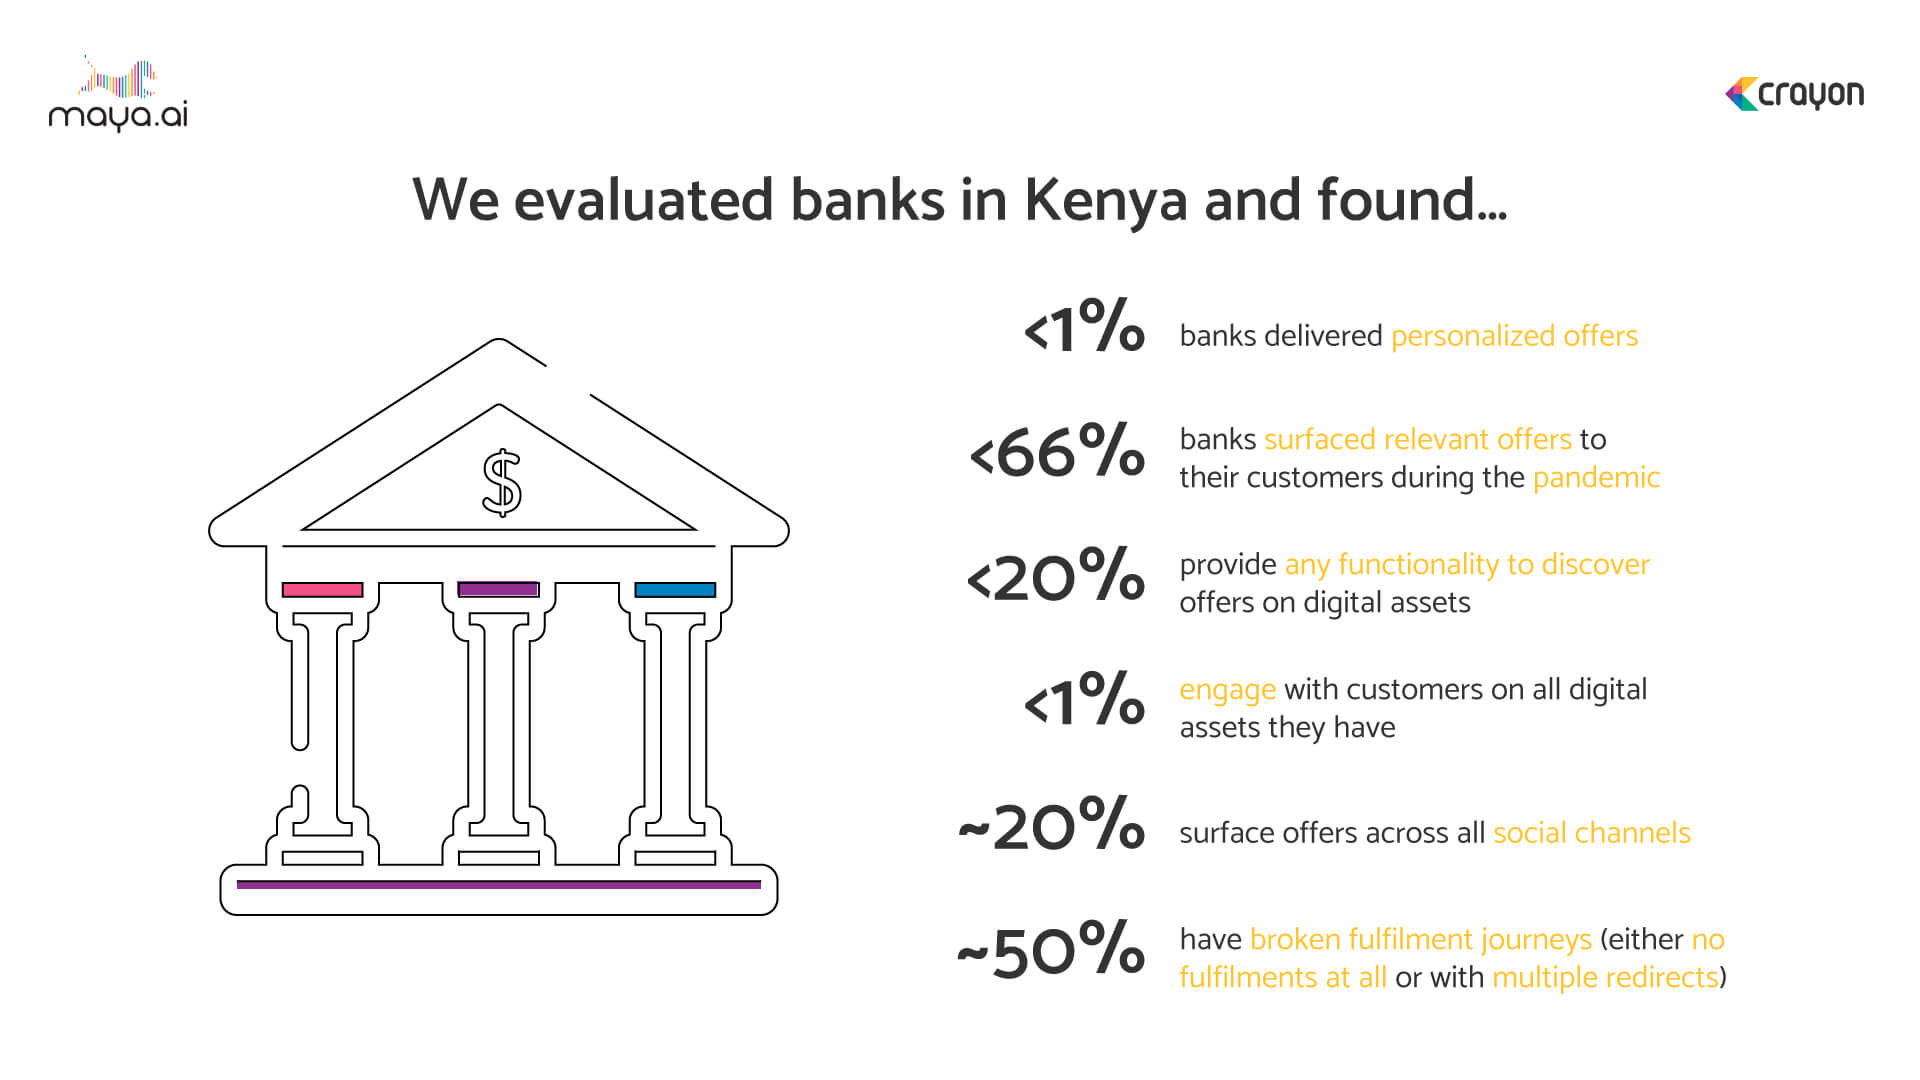 Why should traditional banks be wary